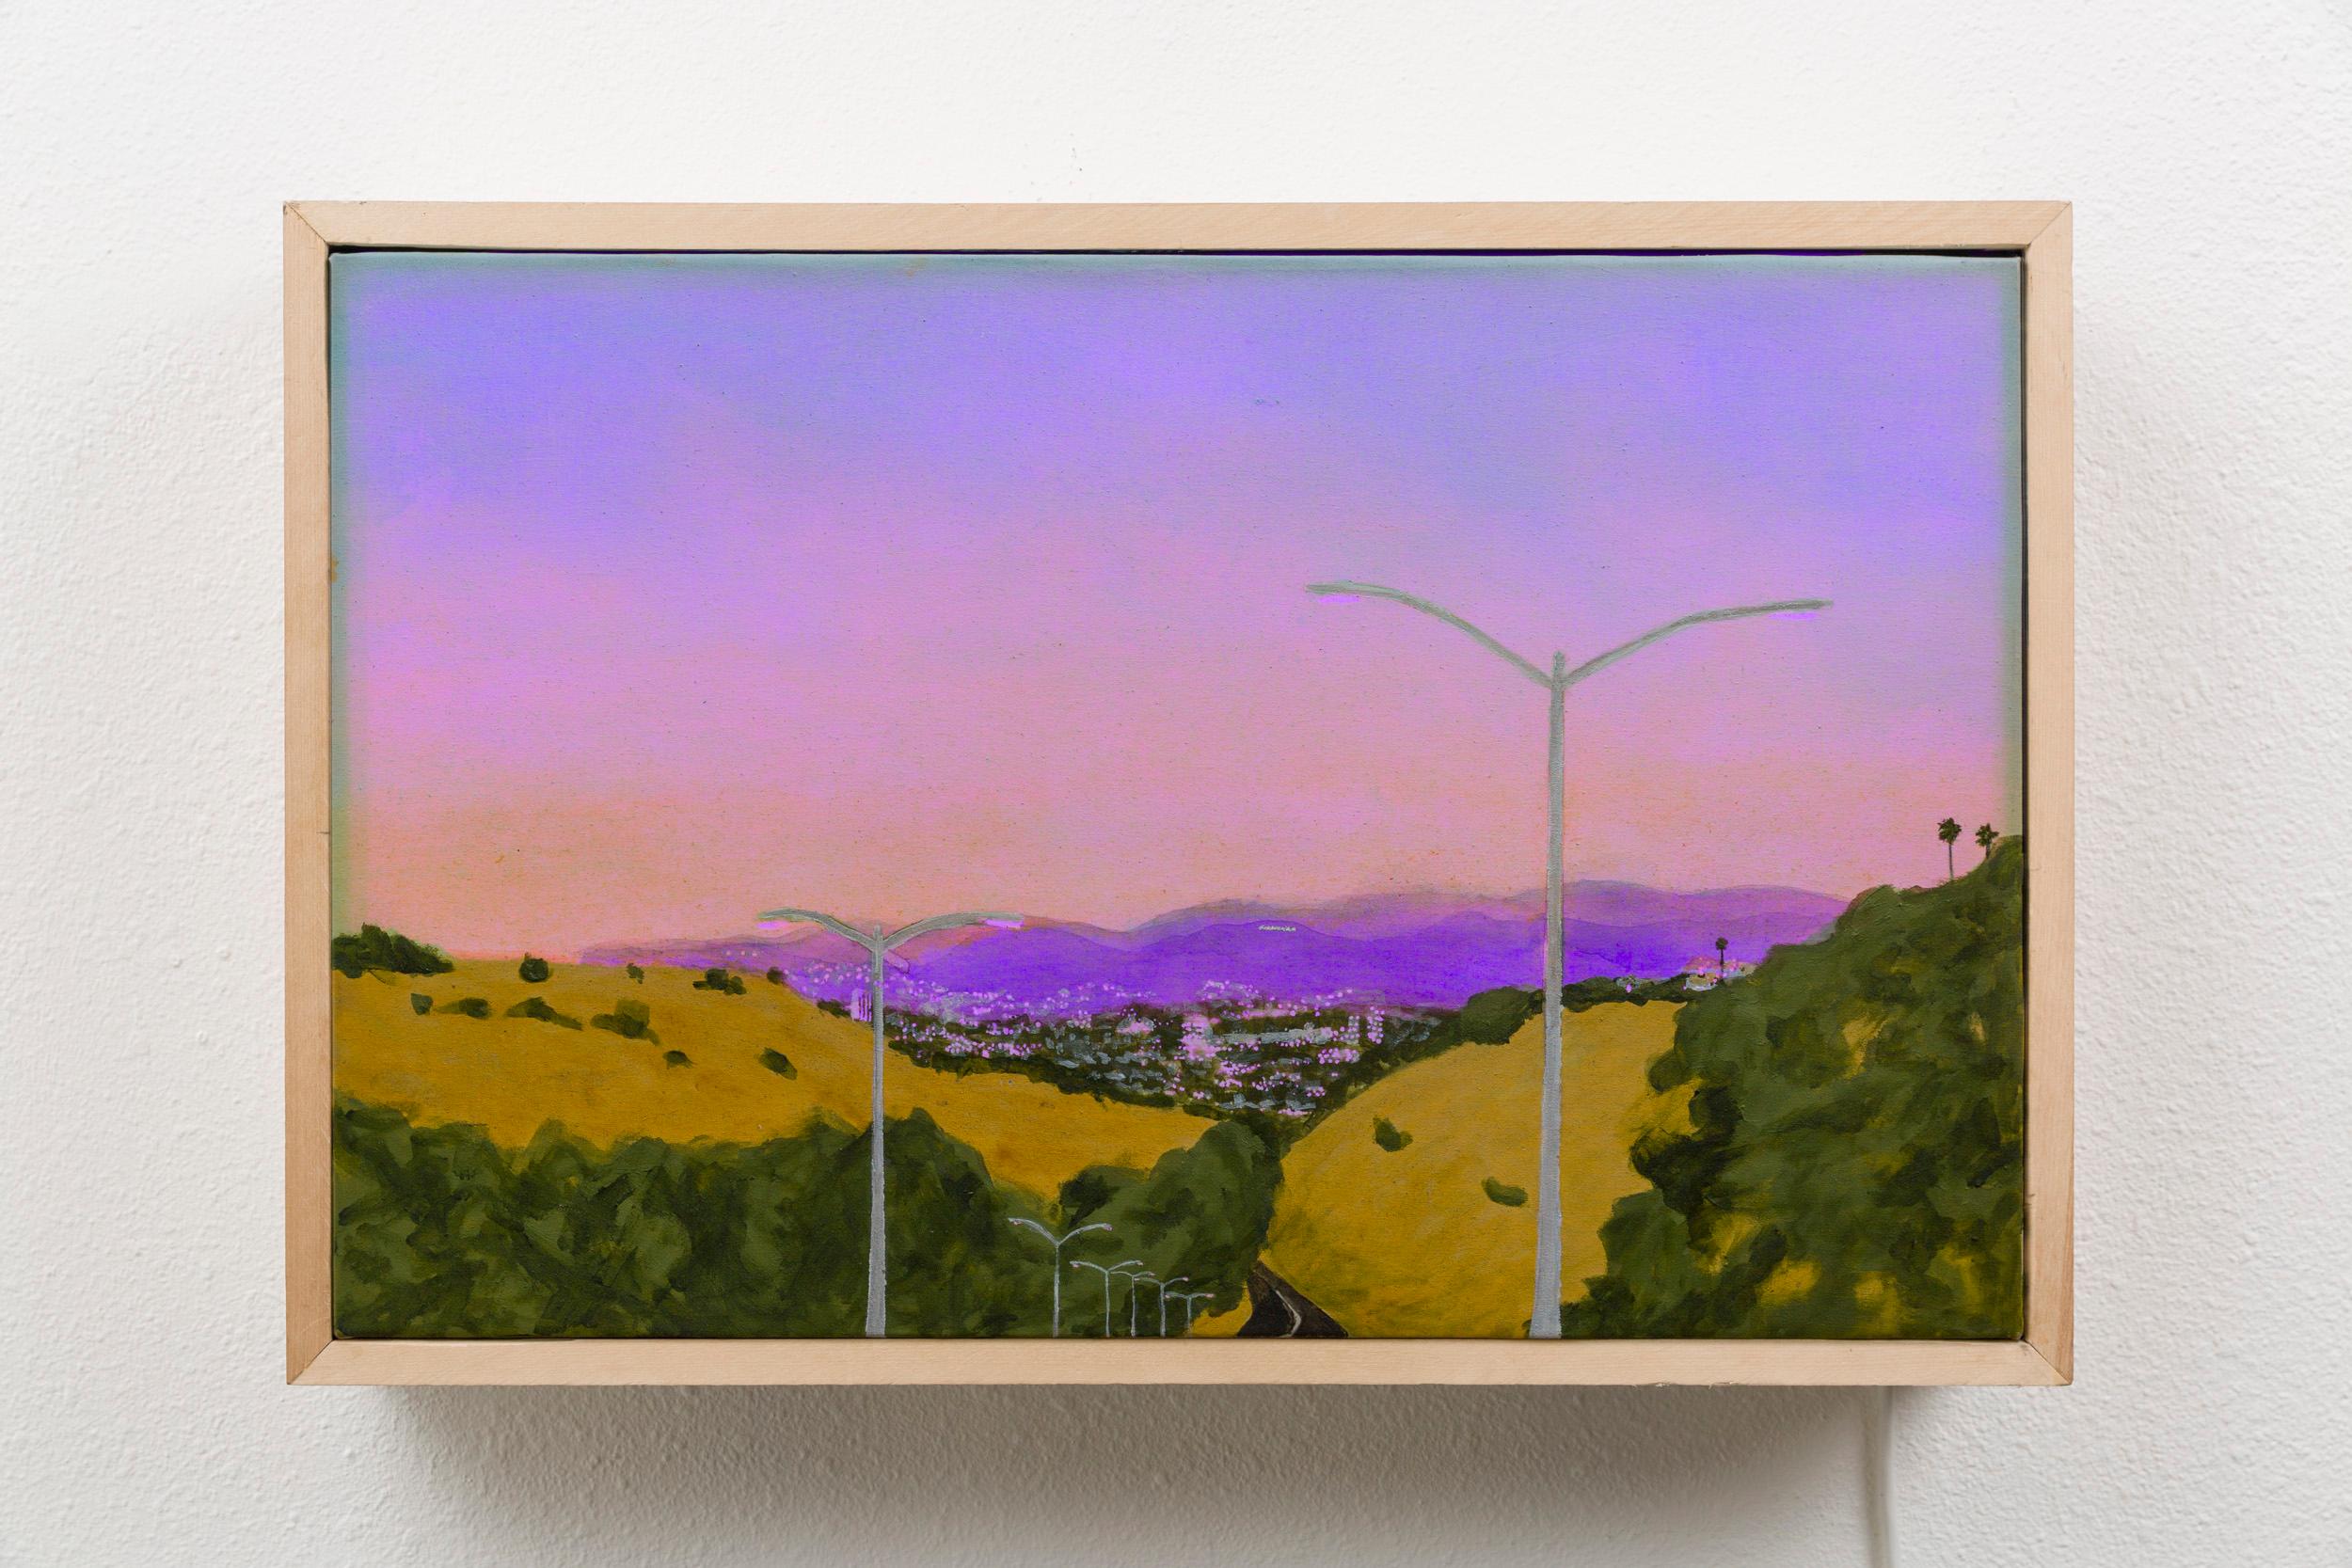 Scenic: Smog, Sunset - Painting by Sharon Levy